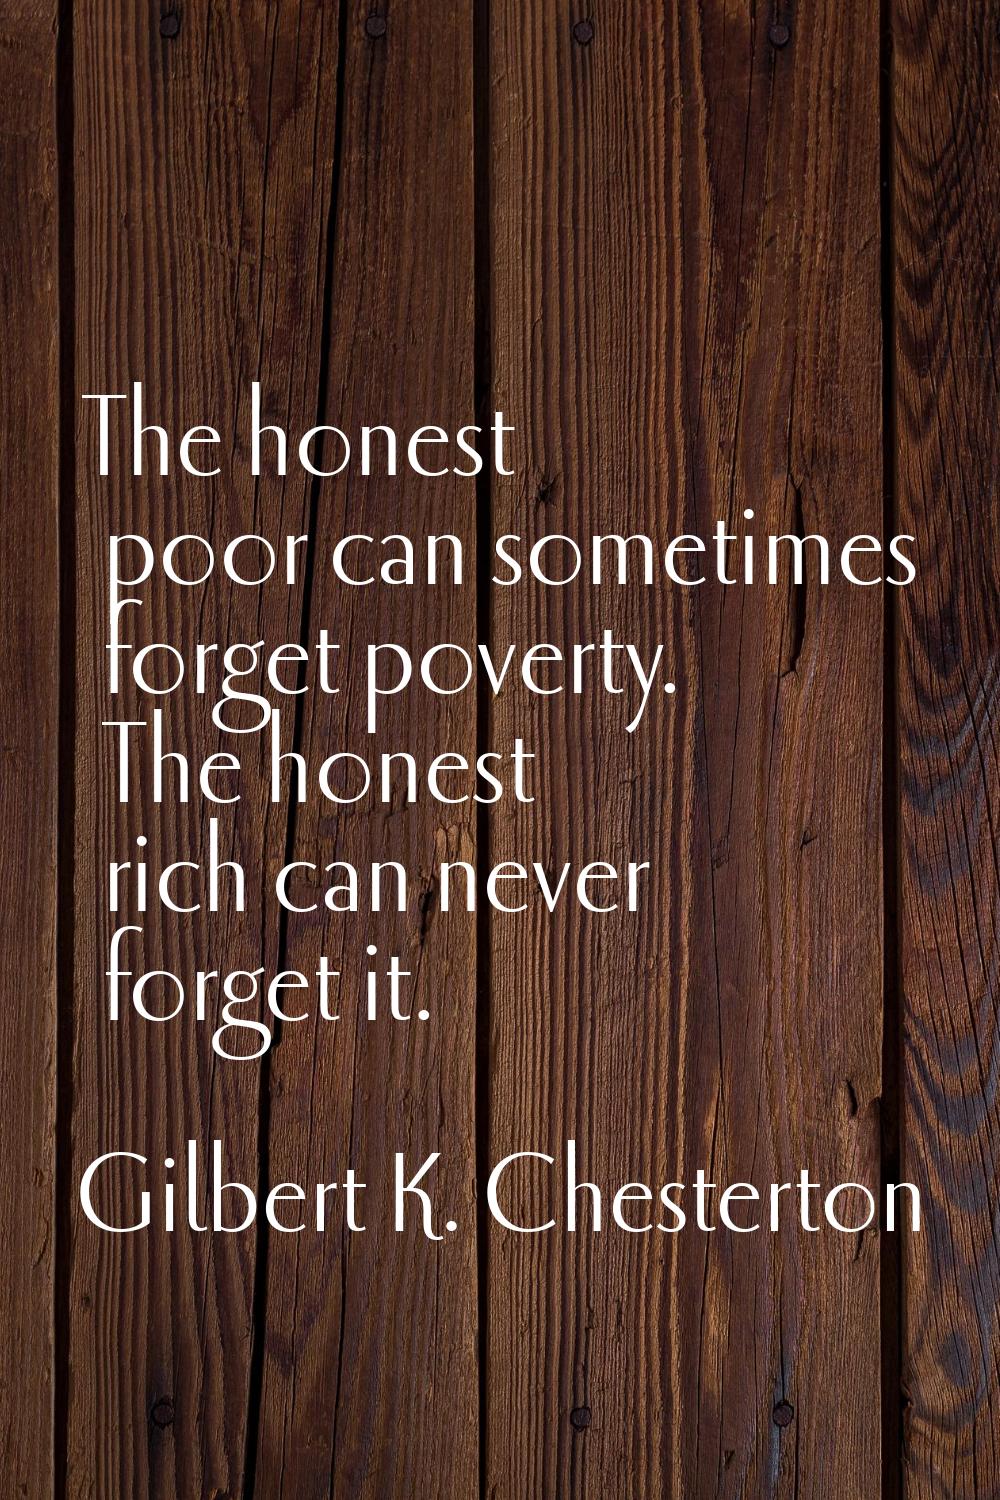 The honest poor can sometimes forget poverty. The honest rich can never forget it.